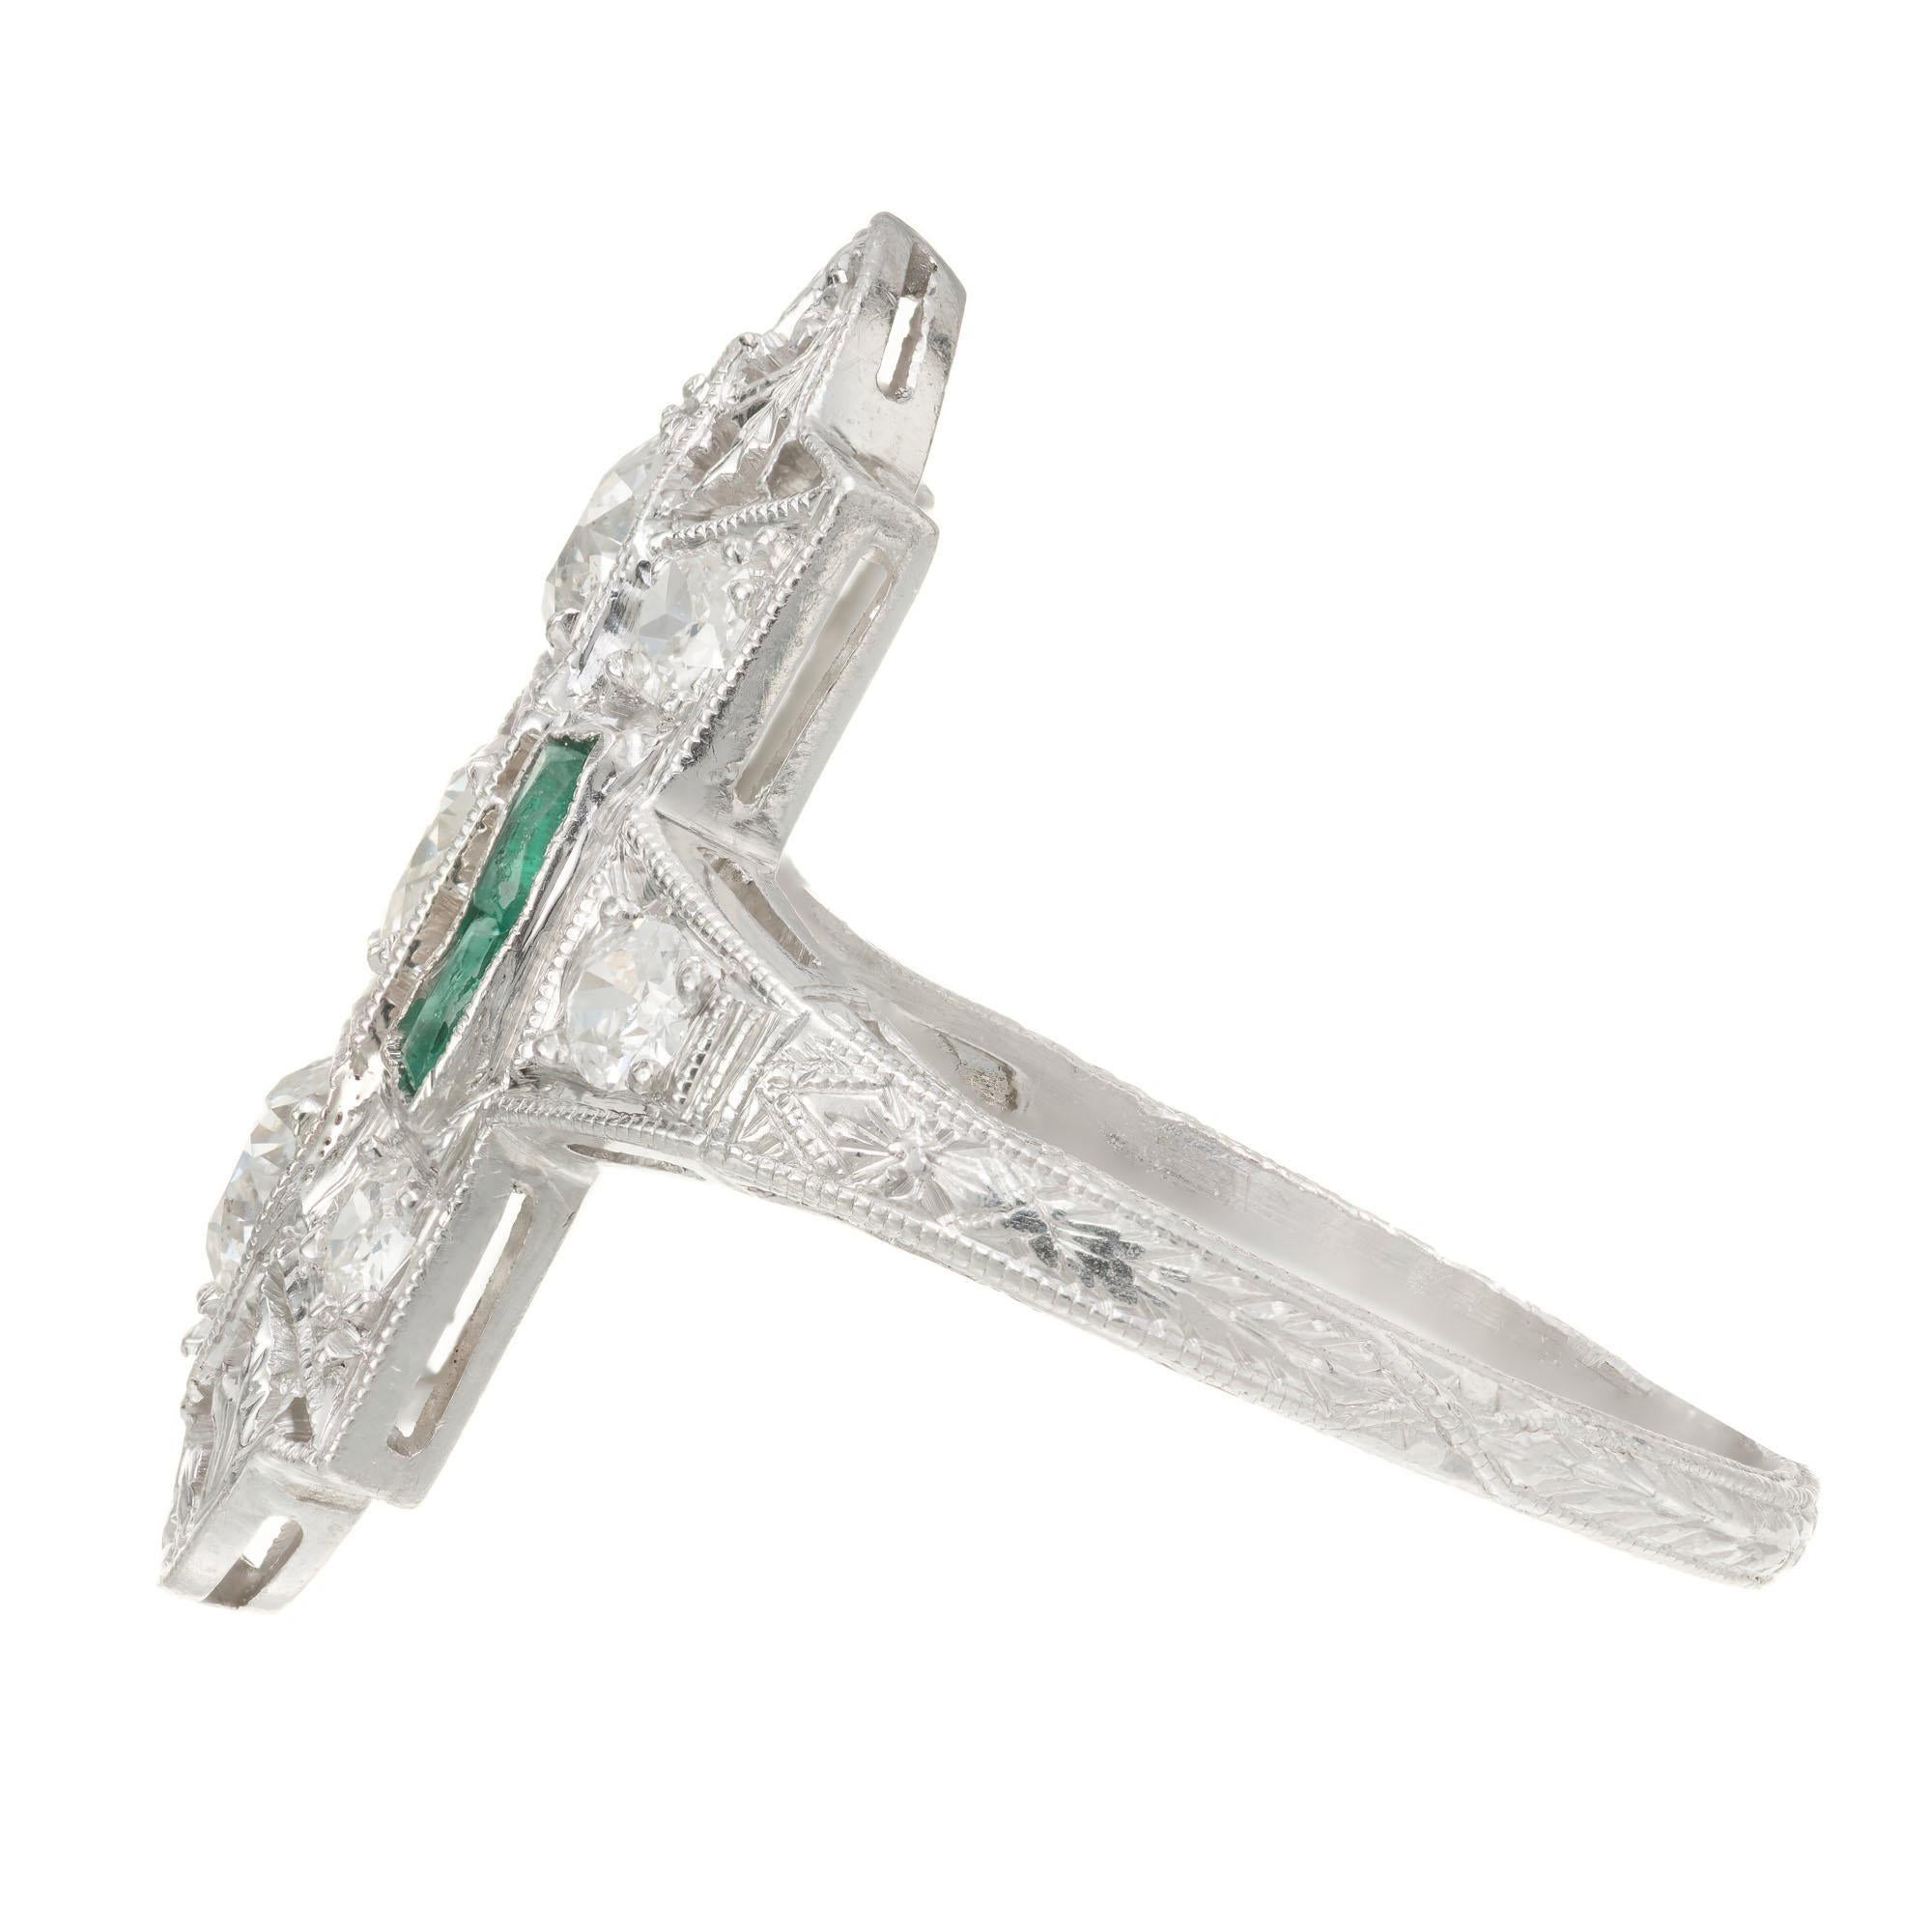 Original 1920’s diamond and emerald pierced and engraved Art Deco Platinum ring. Set with 4 genuine Emeralds and 9 European full cut diamonds. Slight chip to the corner of one emerald.

3 round old European cut diamonds approx. total weight .45cts,